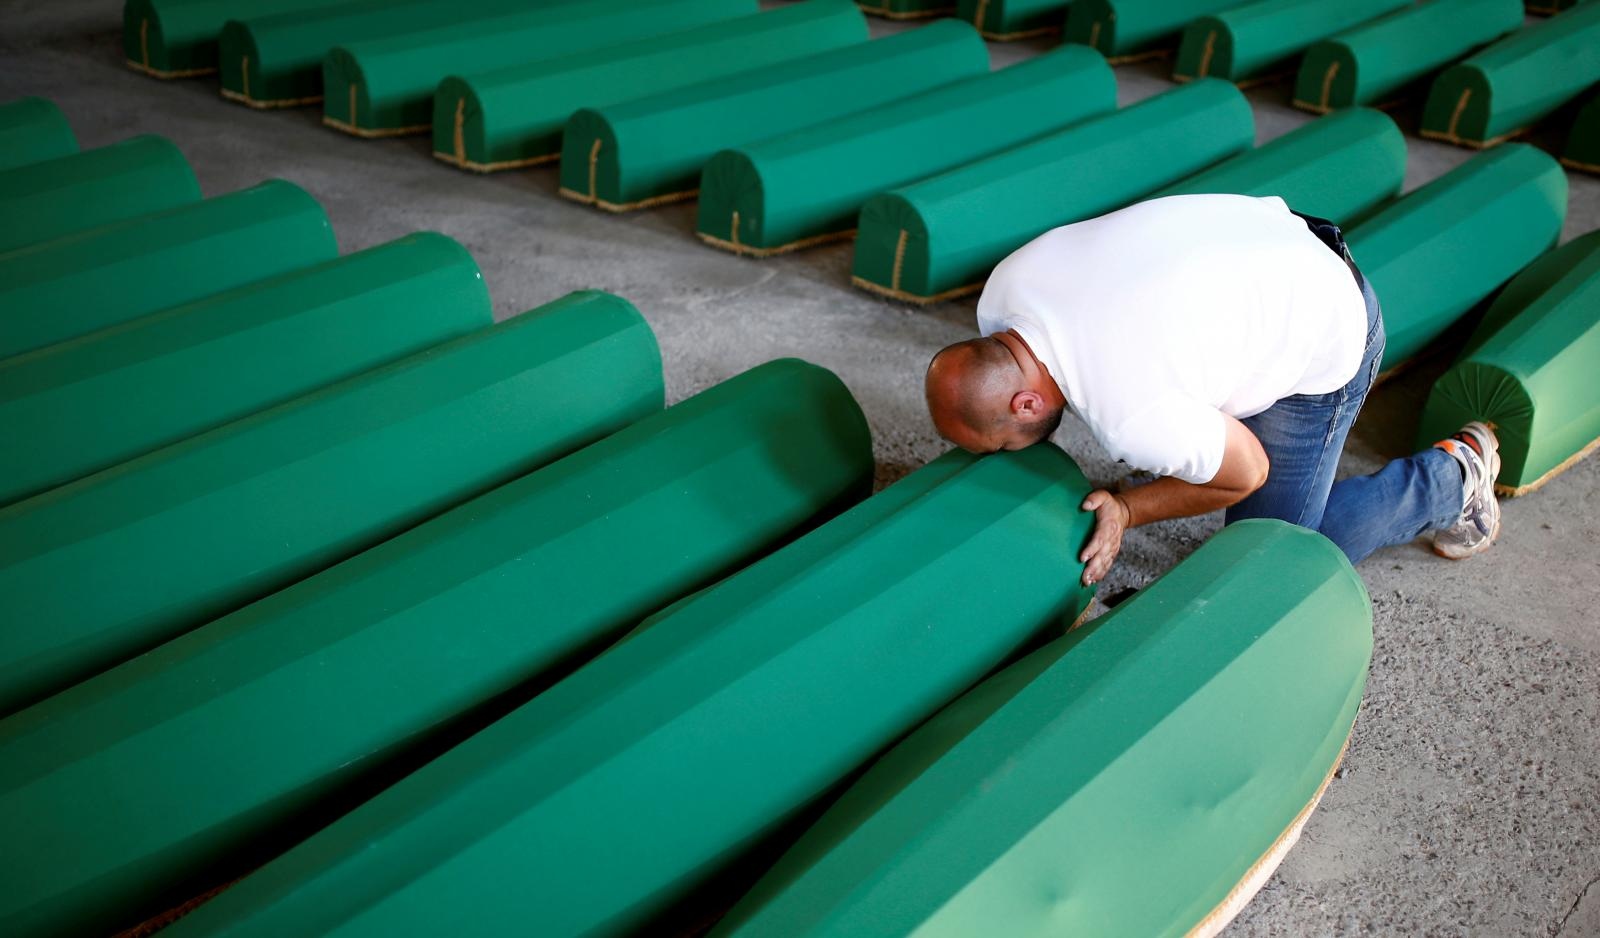 FILE PHOTO: A Muslim man cries near the coffin of his relatives, who are newly identified victims of the 1995 Srebrenica massacre and lined up for a joint burial in Potocari near Srebrenica, Bosnia and Herzegovina FILE PHOTO: A Muslim man cries near the coffin of his relatives, who are newly identified victims of the 1995 Srebrenica massacre and lined up for a joint burial in Potocari near Srebrenica, Bosnia and Herzegovina July 10, 2016. REUTERS/Dado Ruvic/File Photo Dado Ruvic